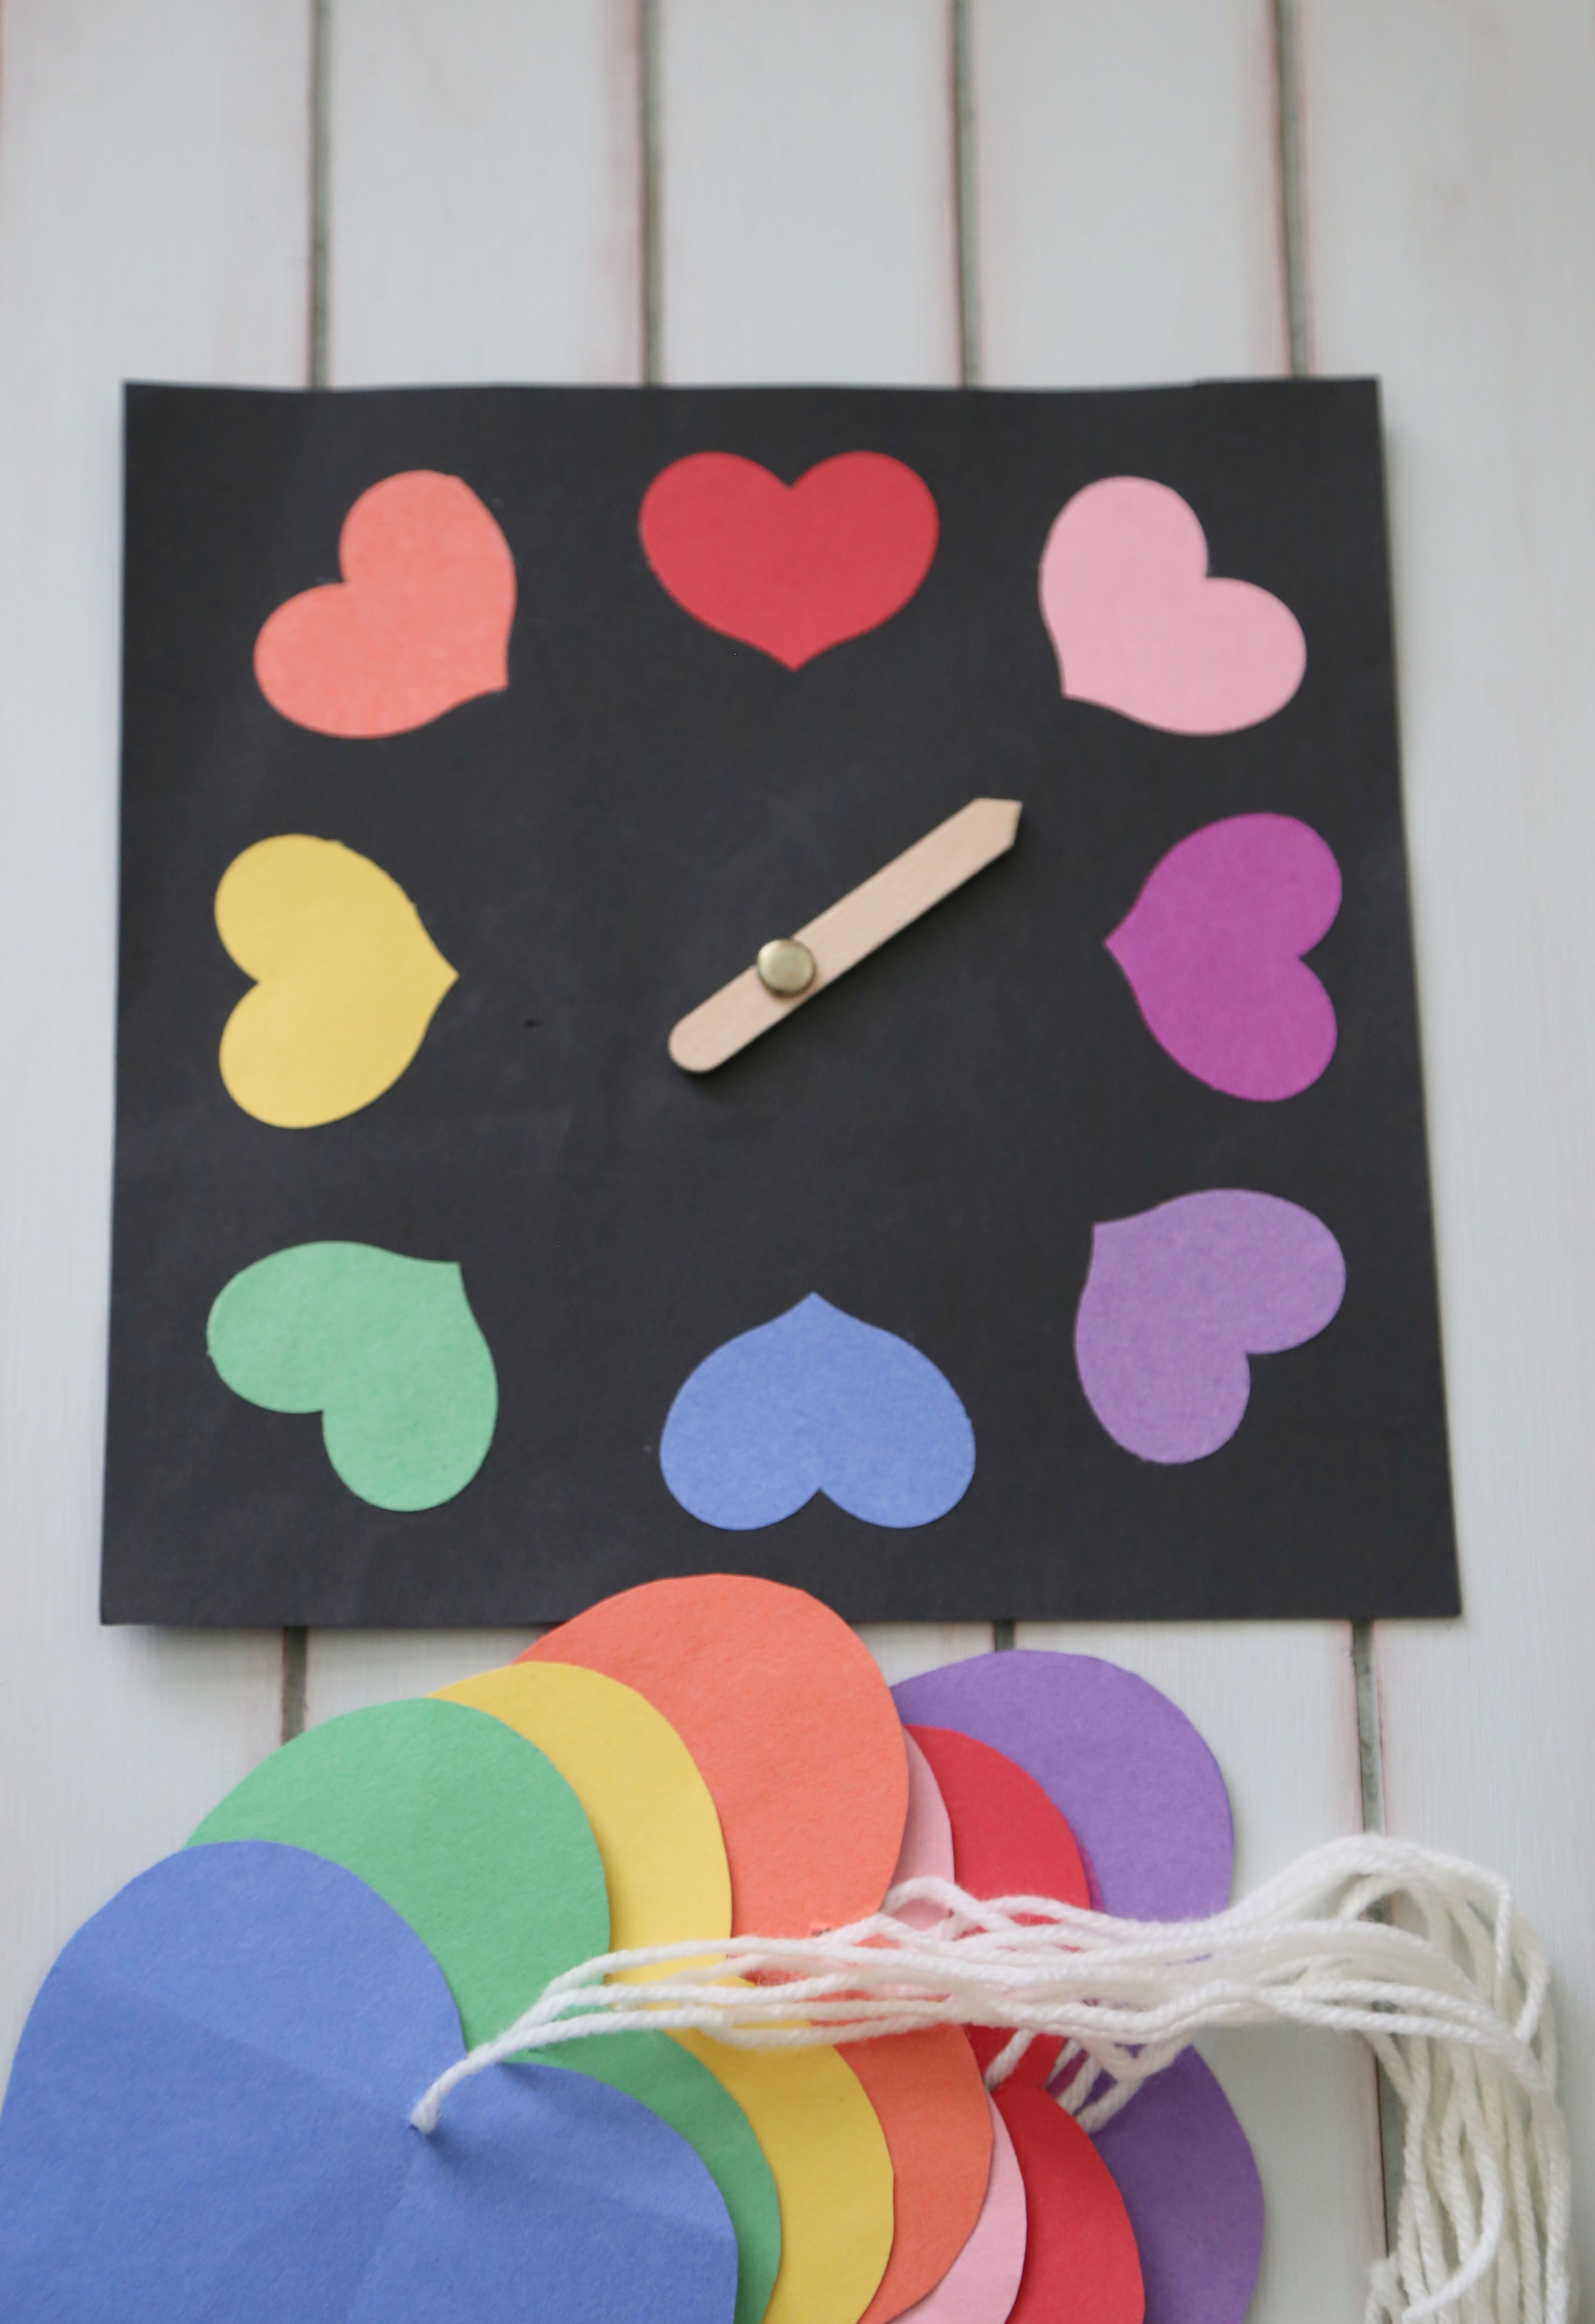 10 Minute Toddler Valentine's Day Crafts - For the Love of Food